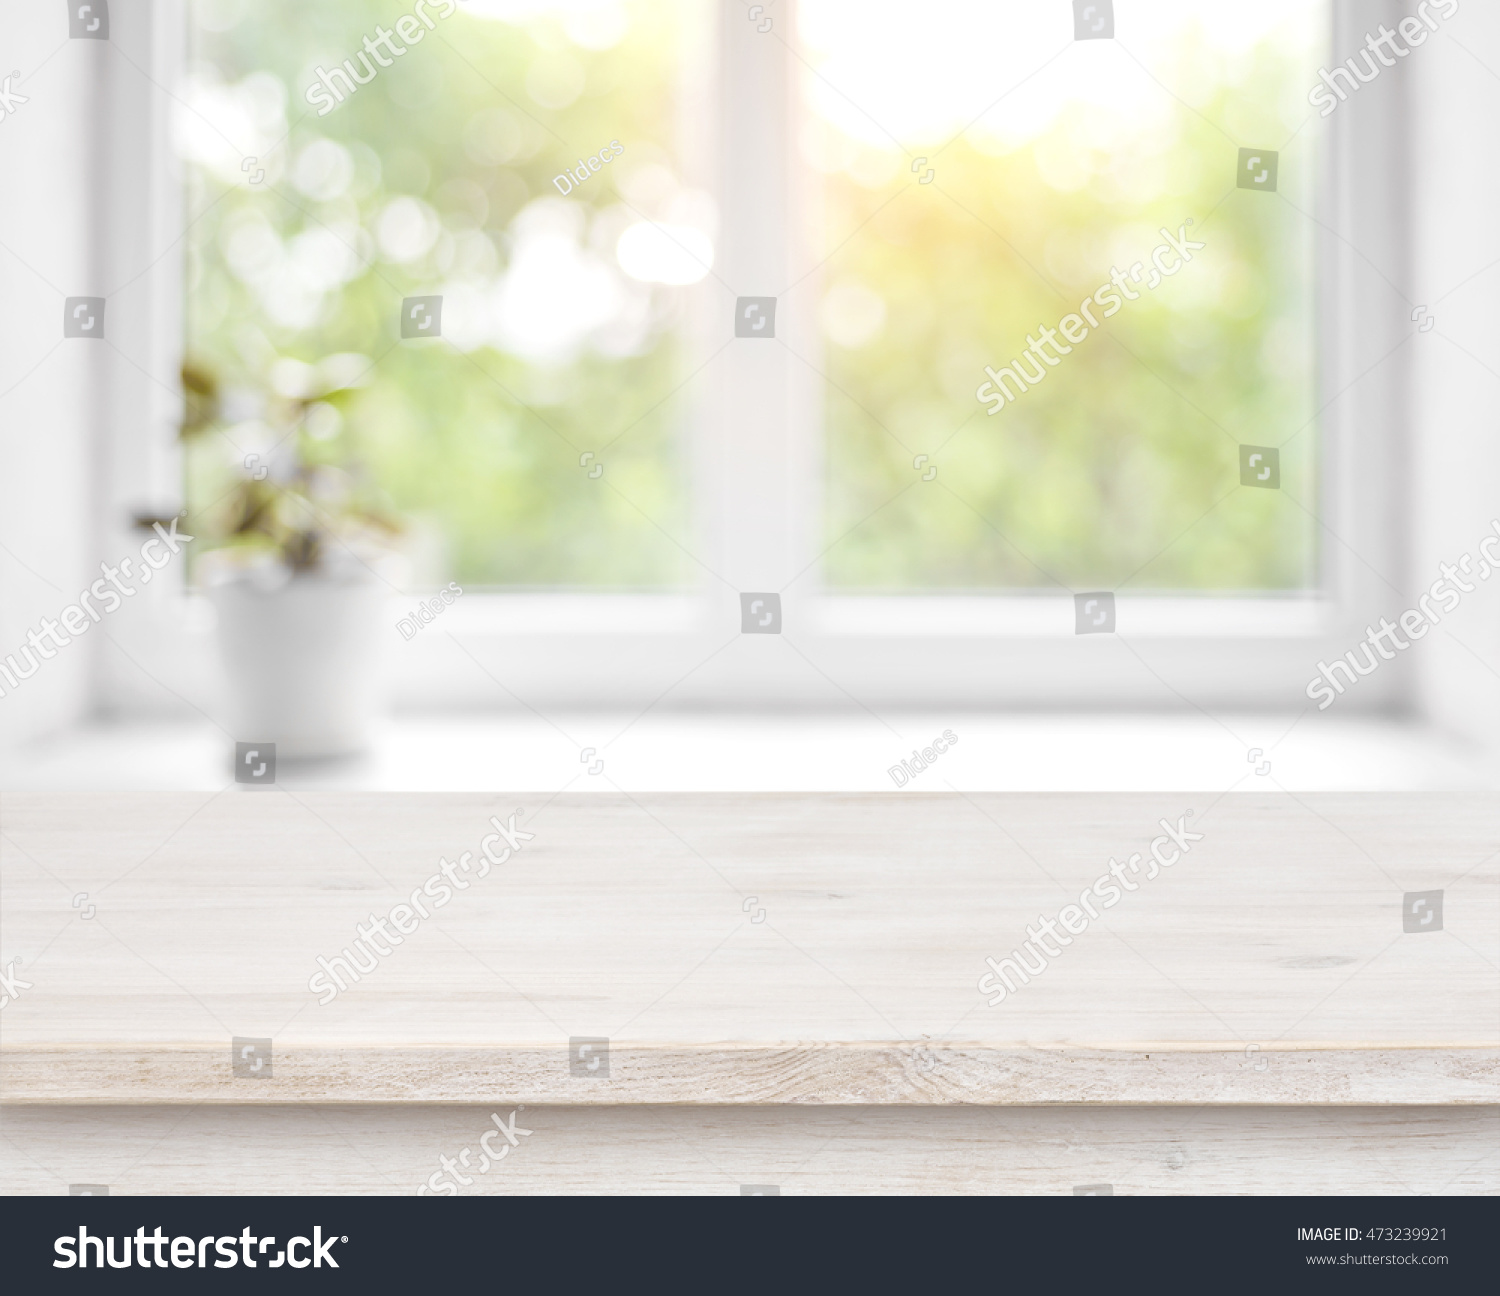 Wooden table on defocused summer window with flower pot background #473239921